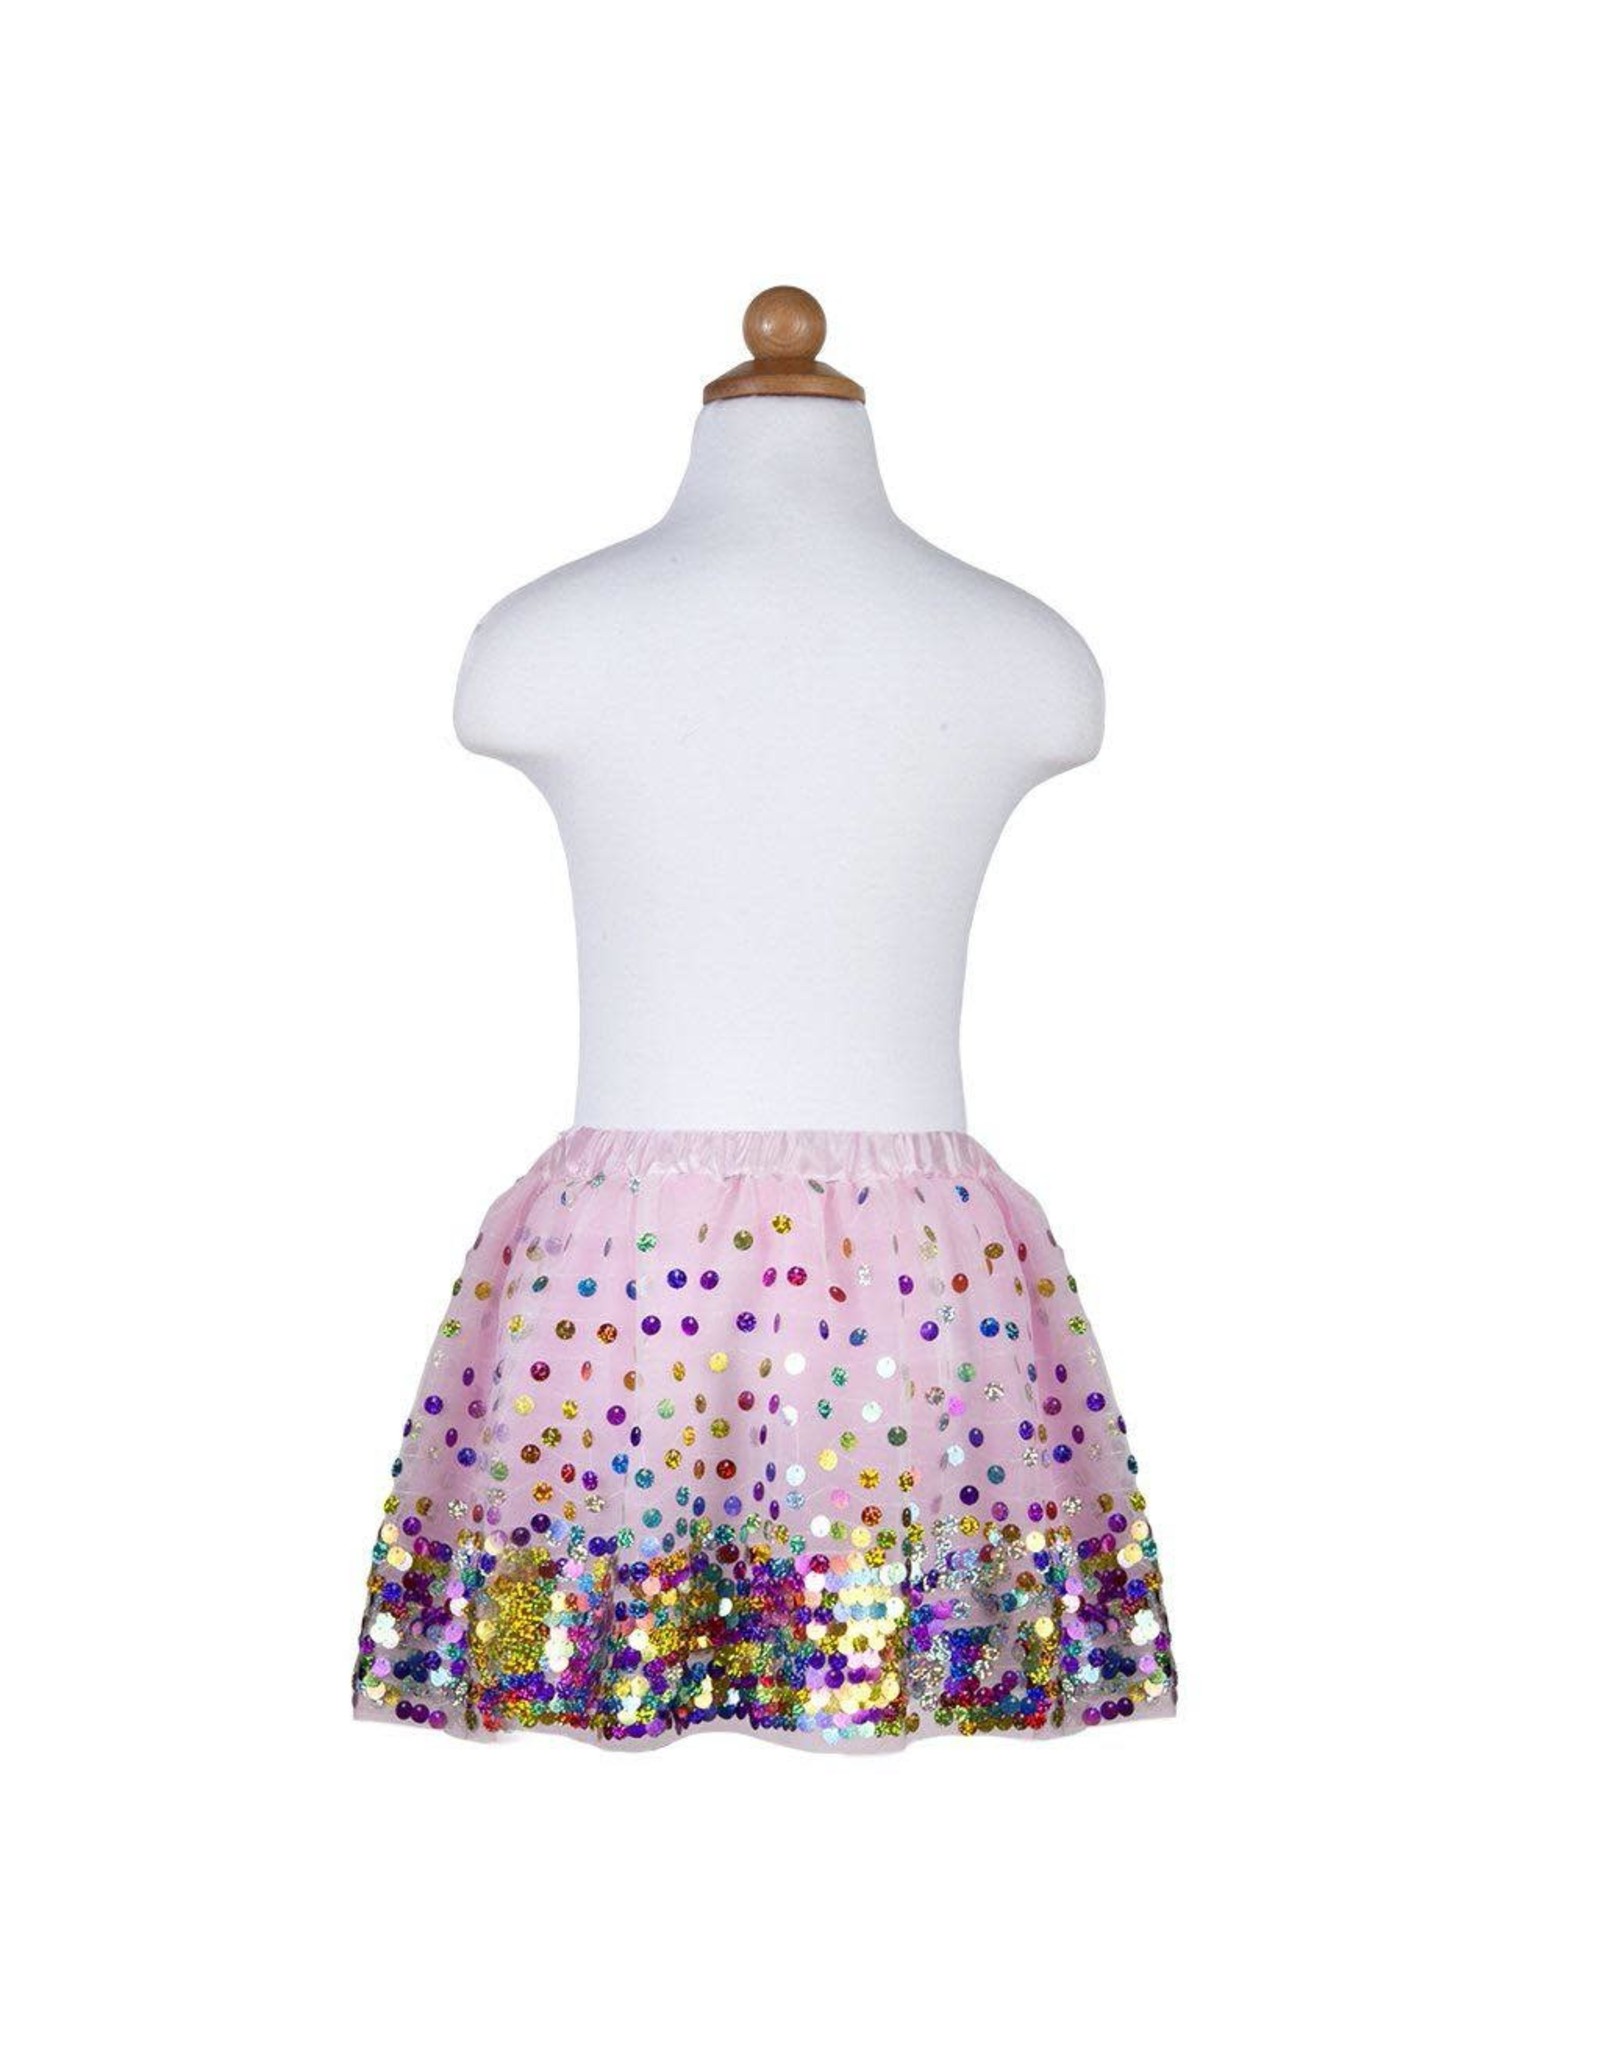 Great Pretenders Party Fun Sequin Skirt Size 4-6